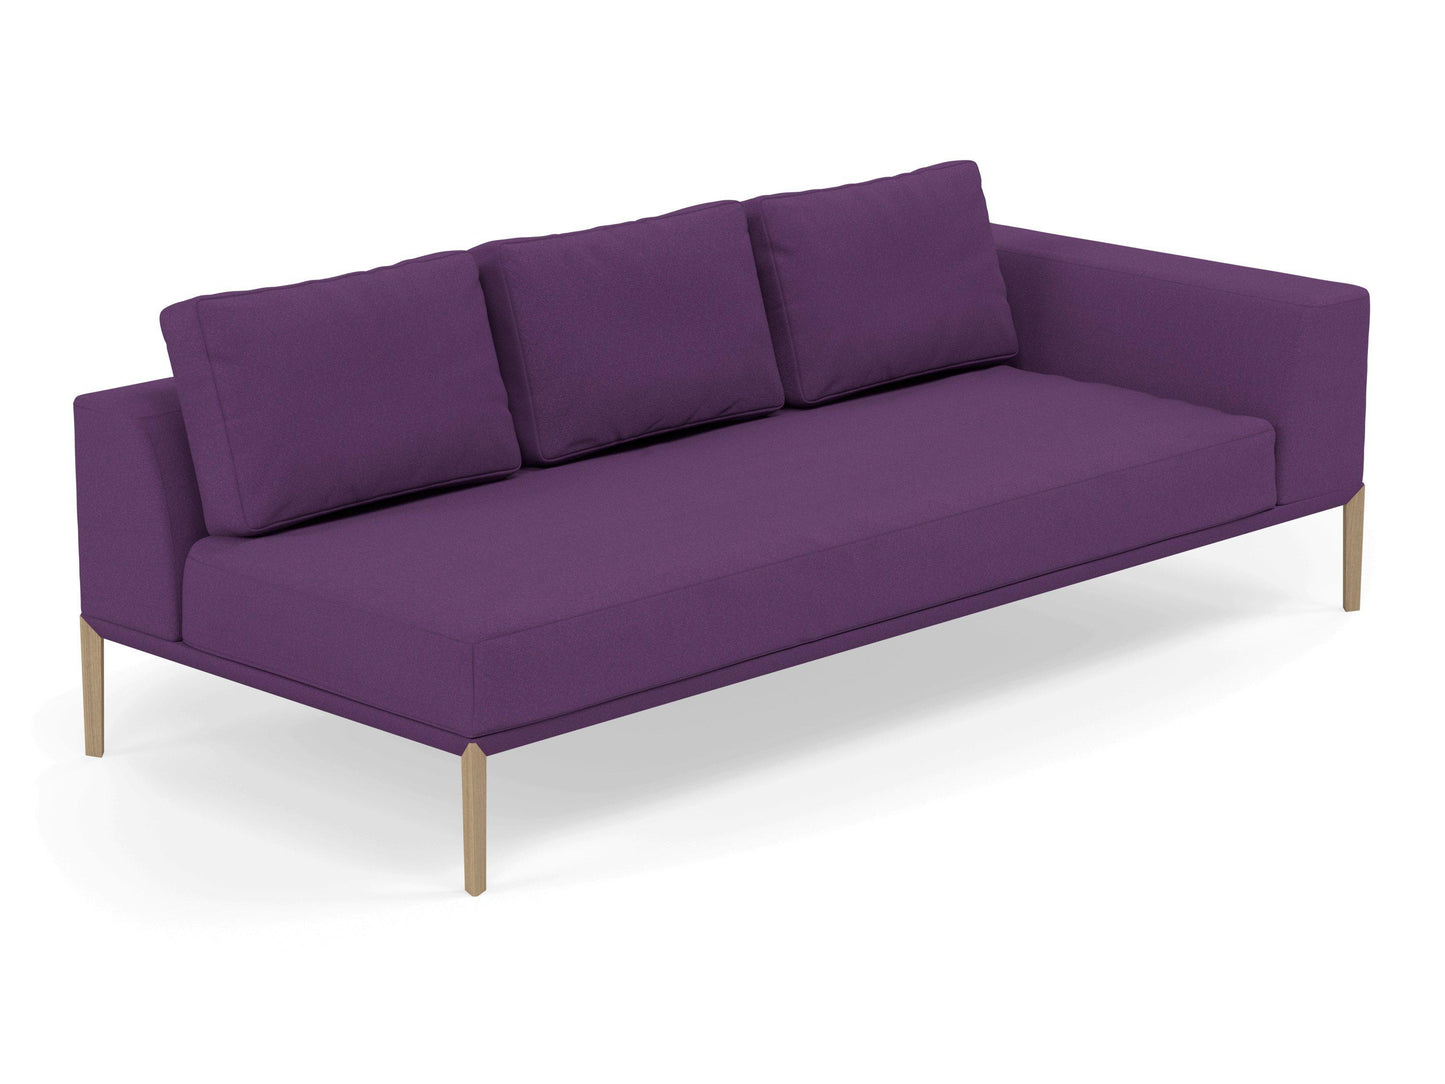 Modern 3 Seater Chaise Lounge Style Sofa with Left Armrest in Deep Purple Fabric-Distinct Designs (London) Ltd